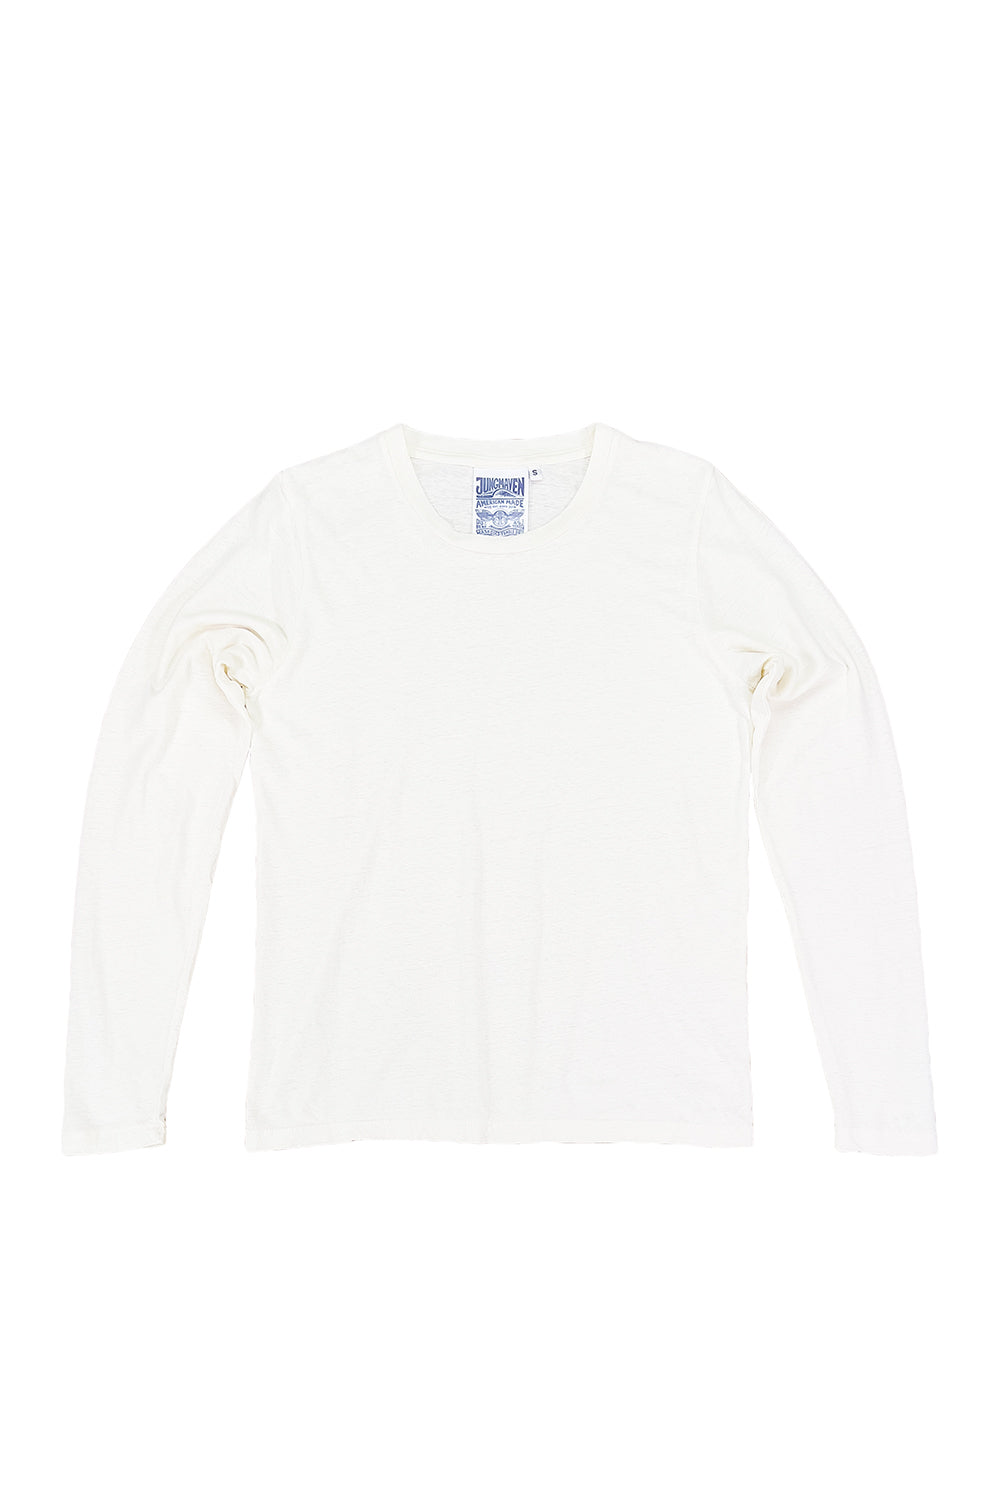 Encanto Long Sleeve Tee | Jungmaven Hemp Clothing & Accessories / Color: Washed White